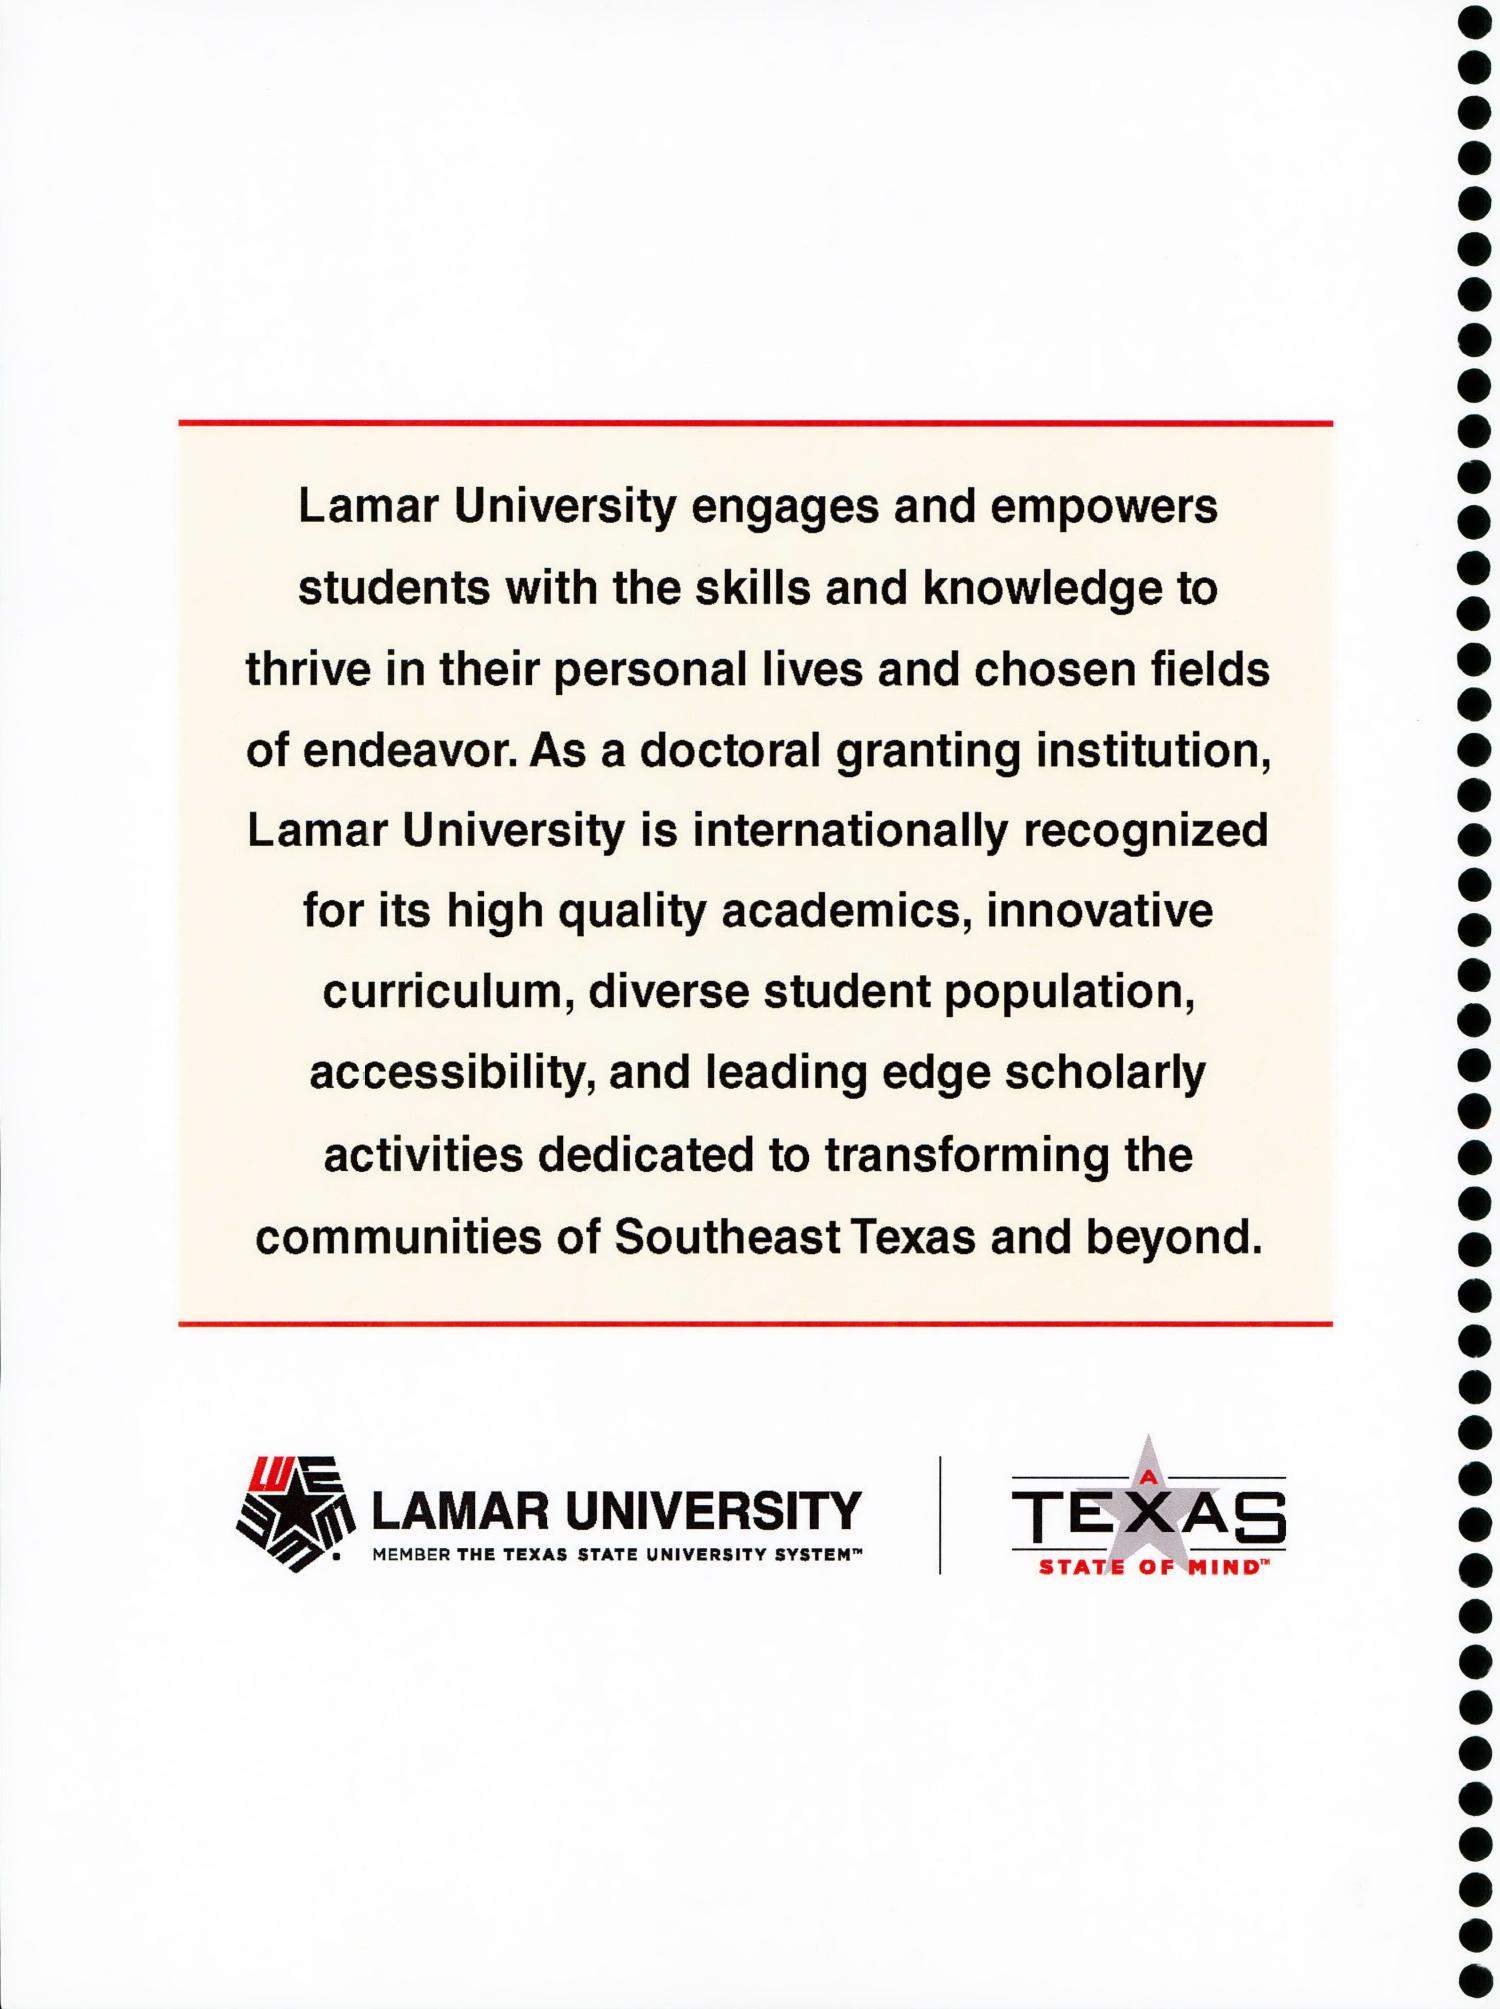 Lamar University Annual Financial Report: 2016
                                                
                                                    Inside Front Cover
                                                